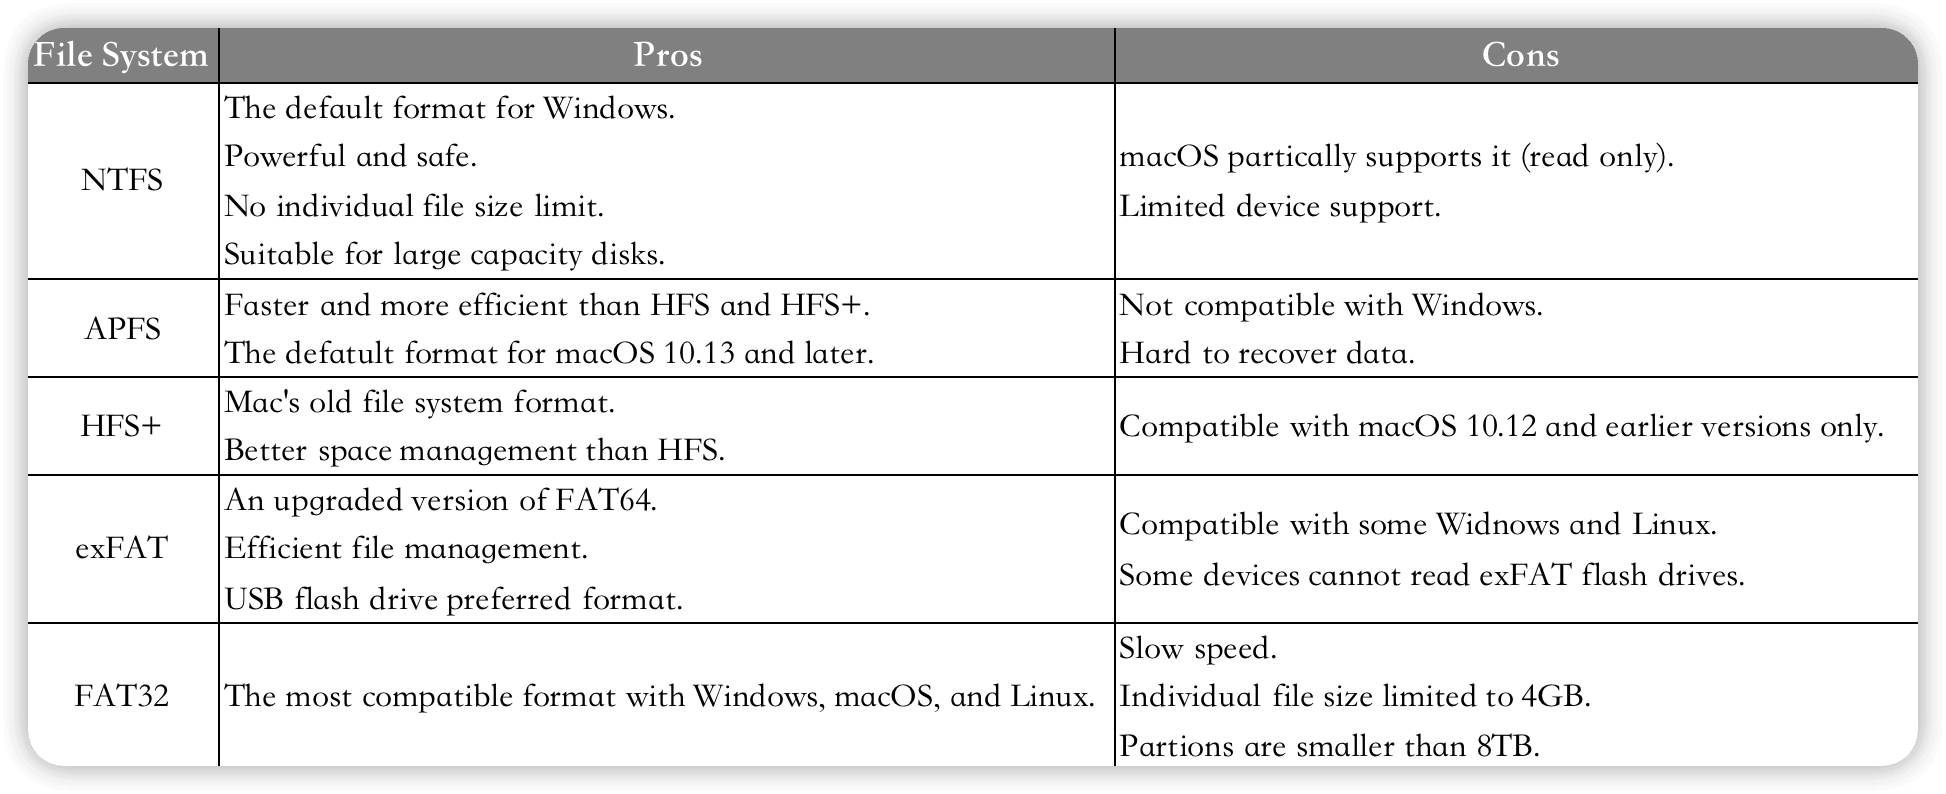 pros-and-cons-of-ntfs-apfs-hfs+-exfat-fat32.png